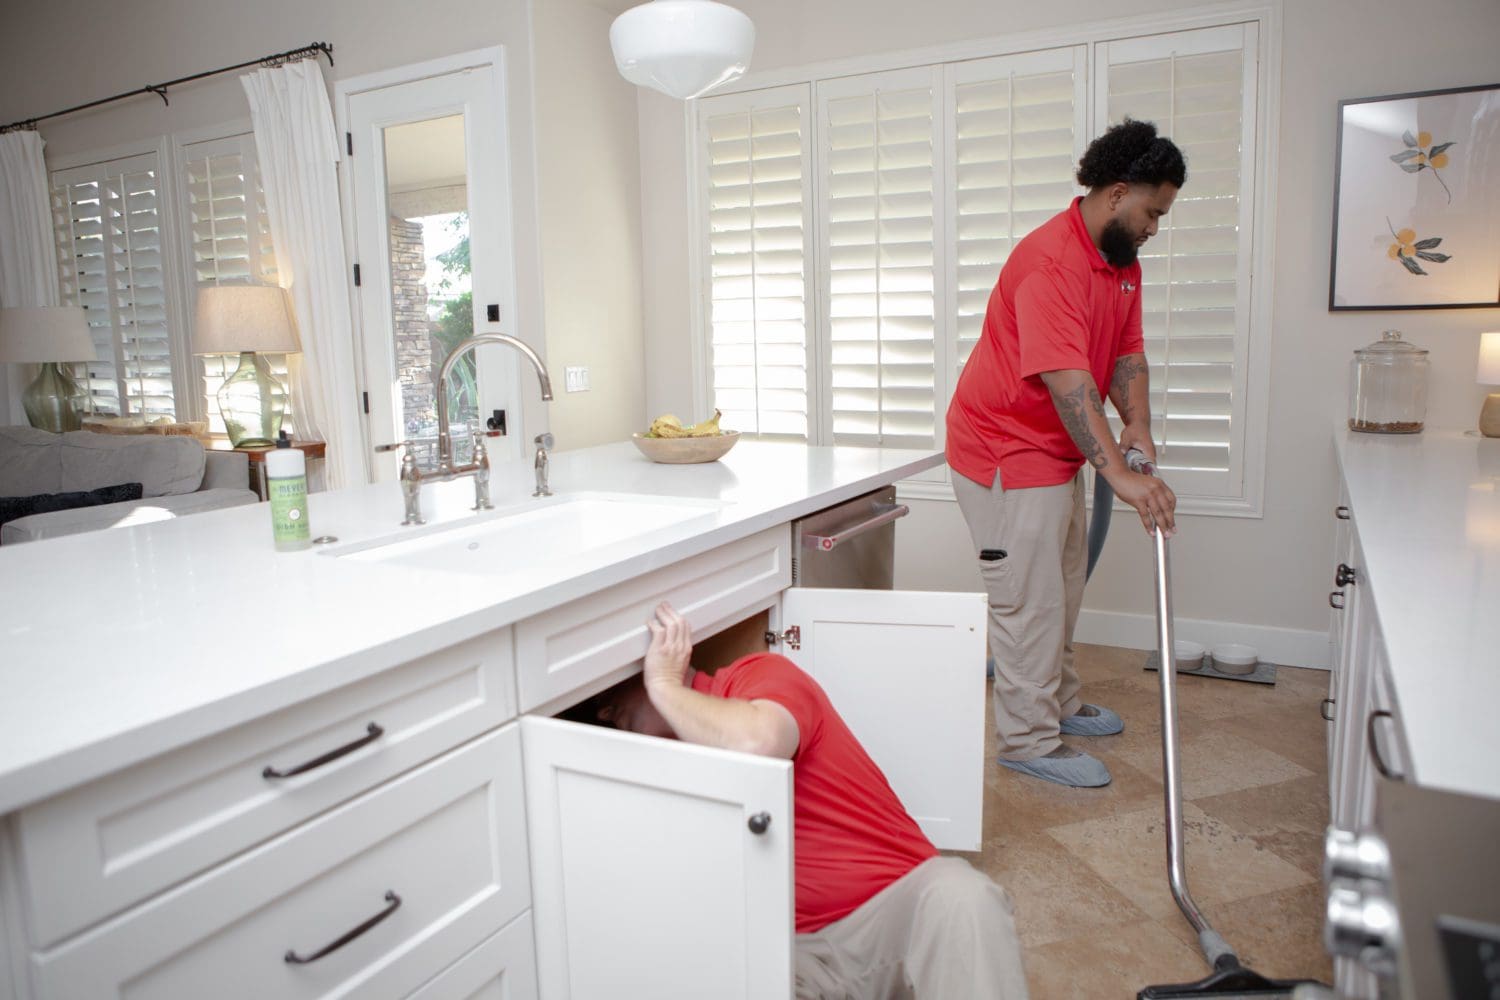 Causes Of Water Damage And How To Speed up the Cleanup